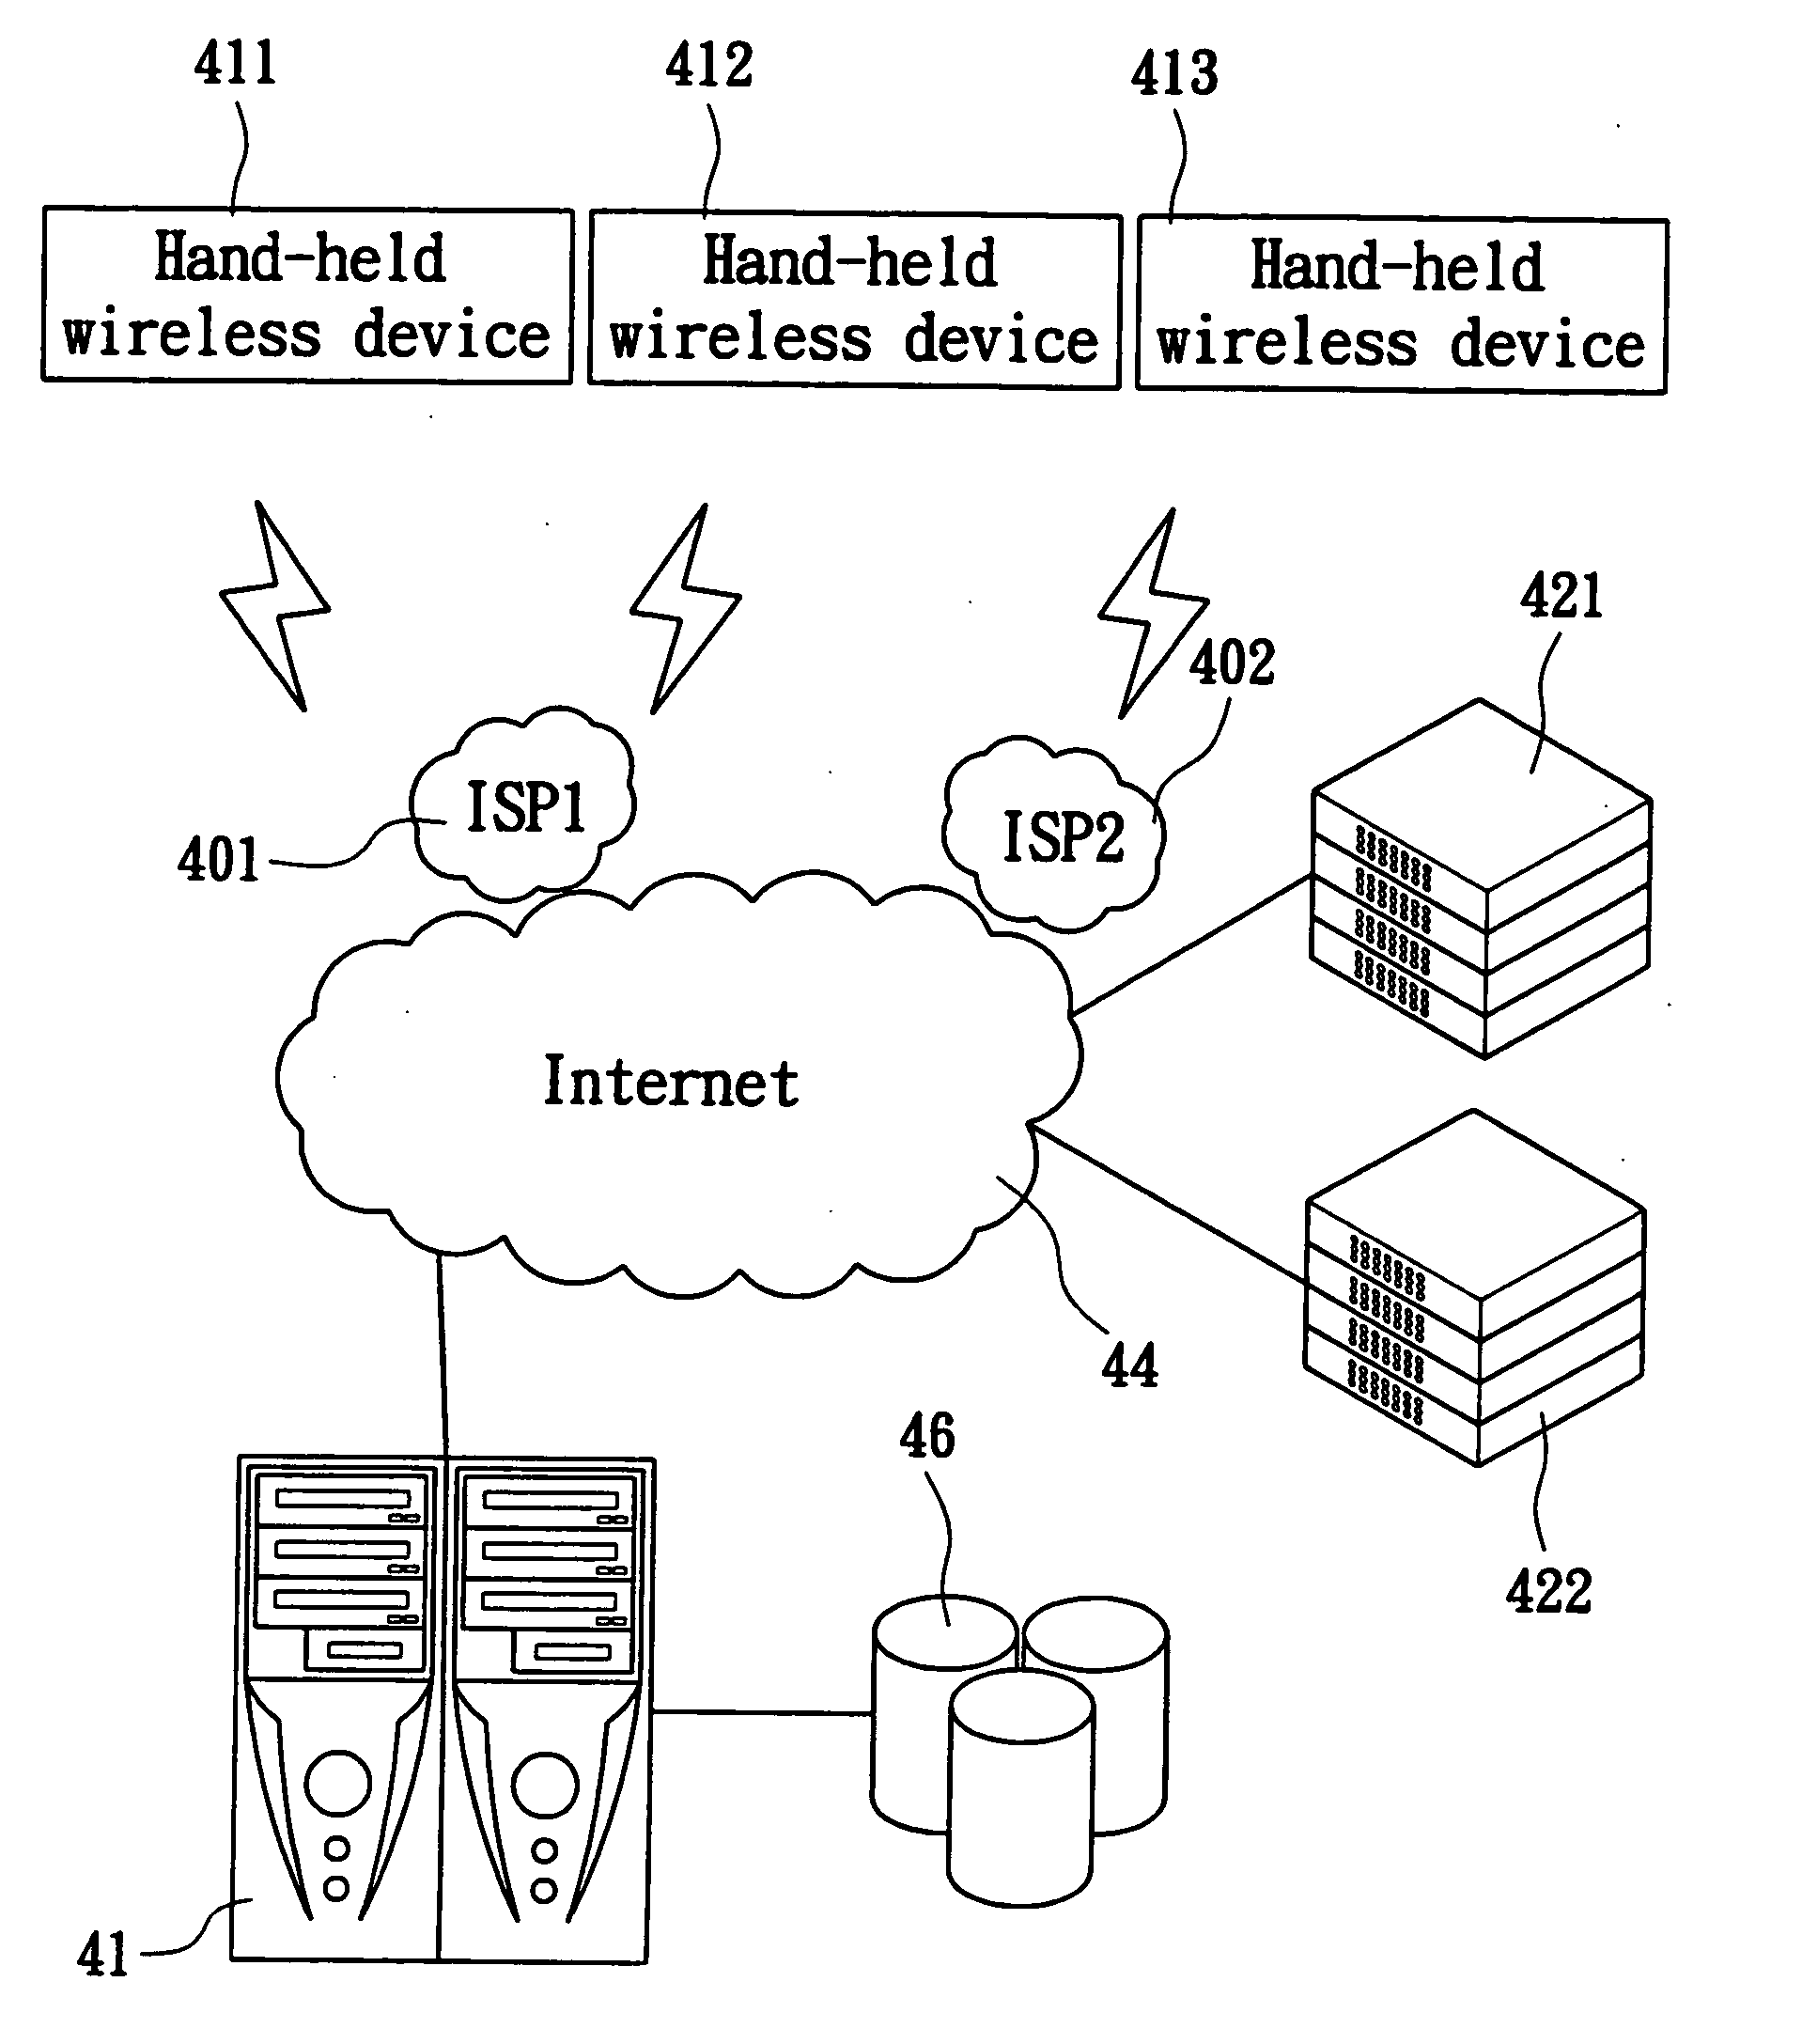 Operating method for a wireless recreation system